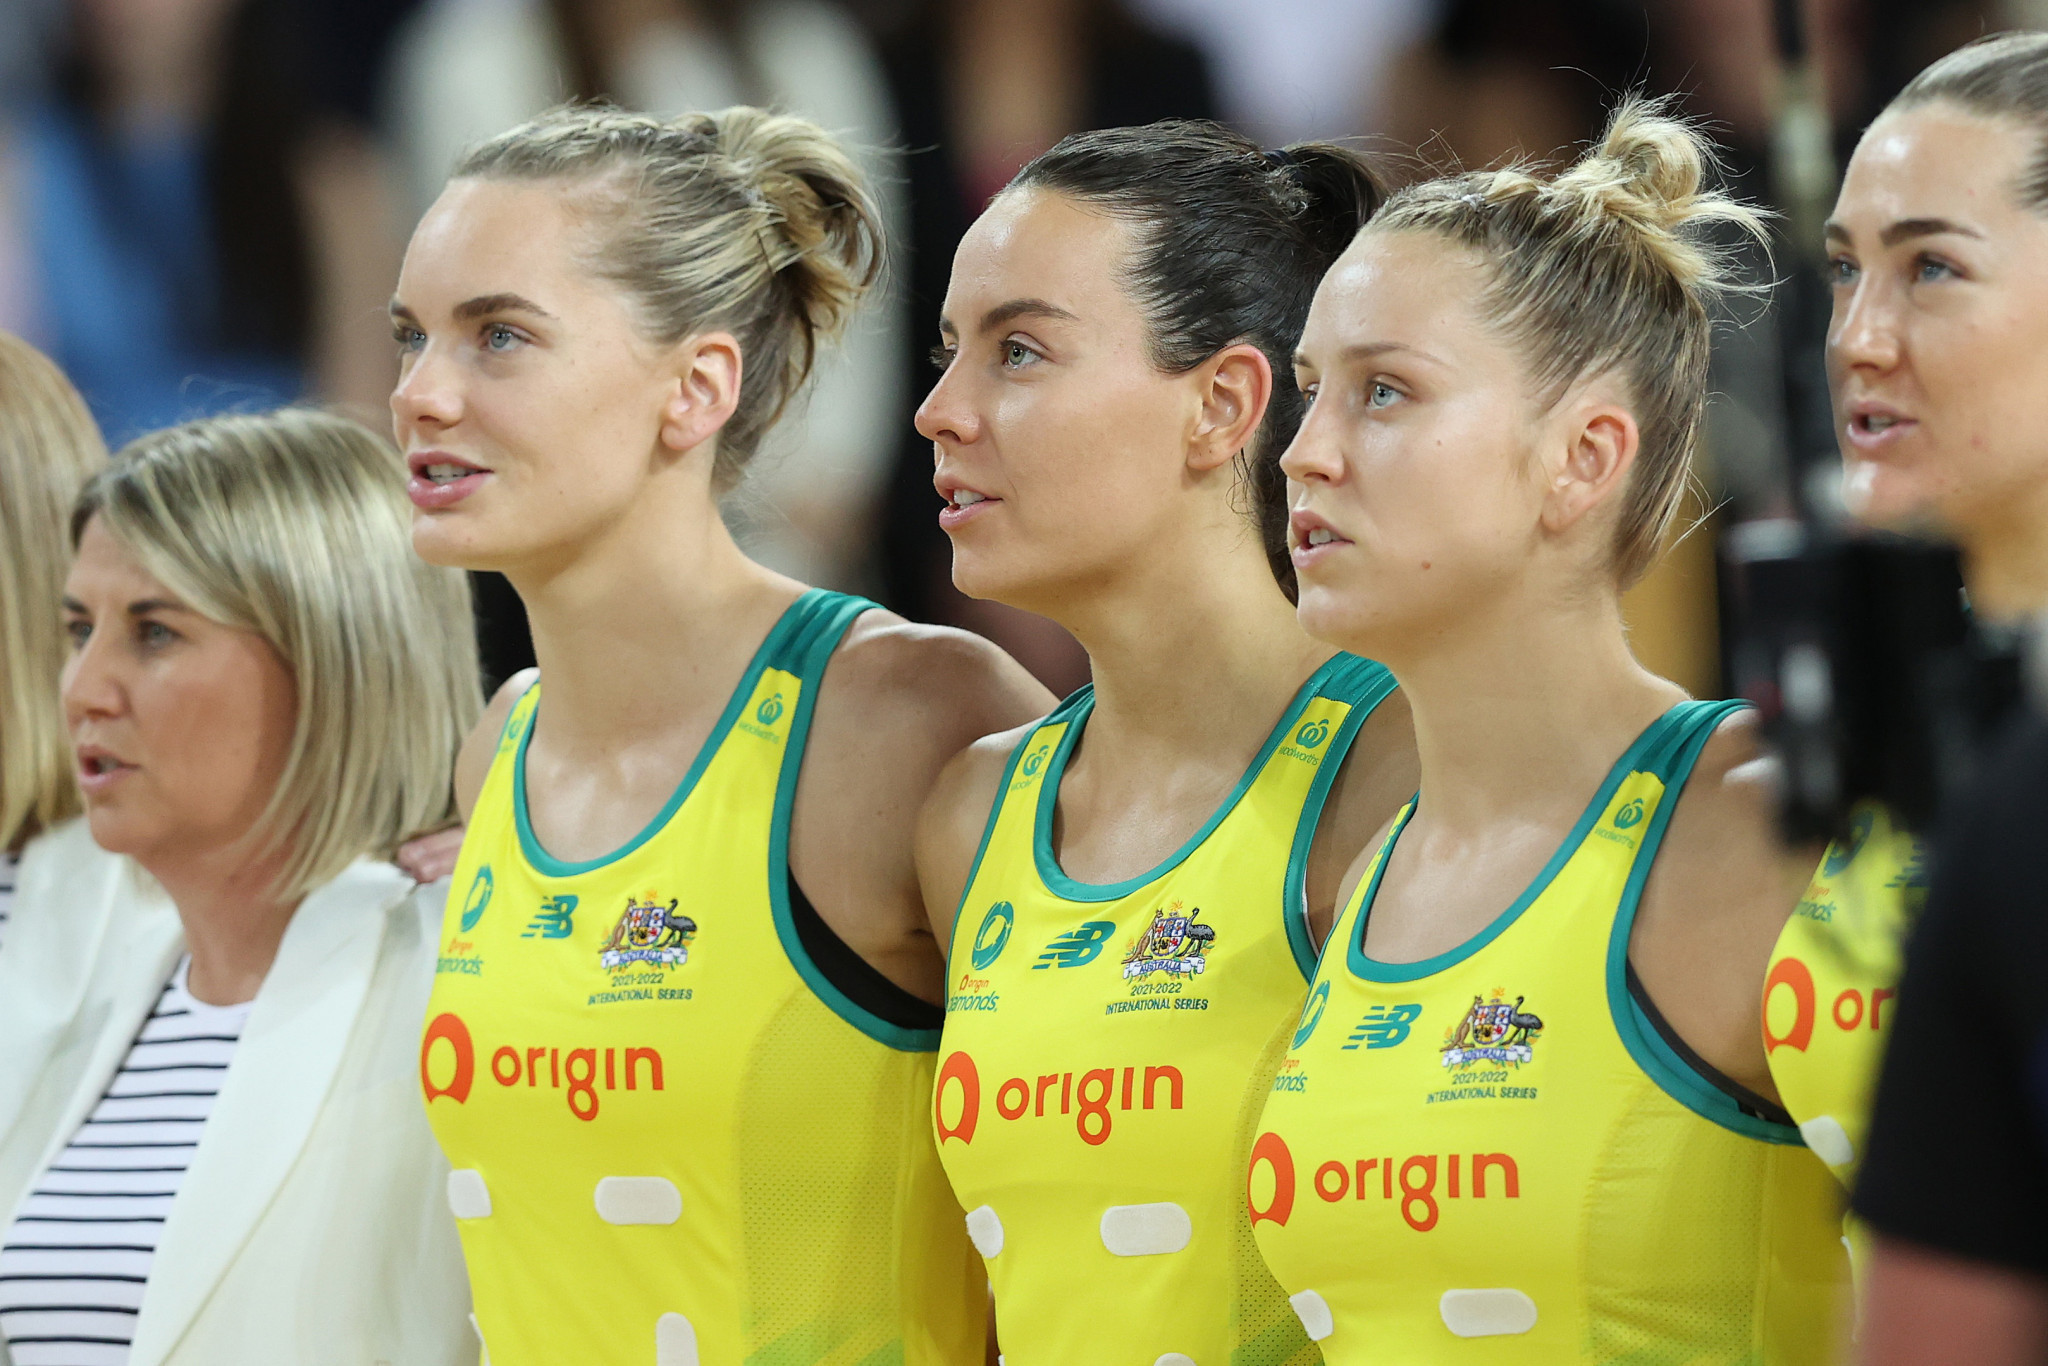 Key sponsors stick with Netball Australia after Hancock Prospecting deal disappears